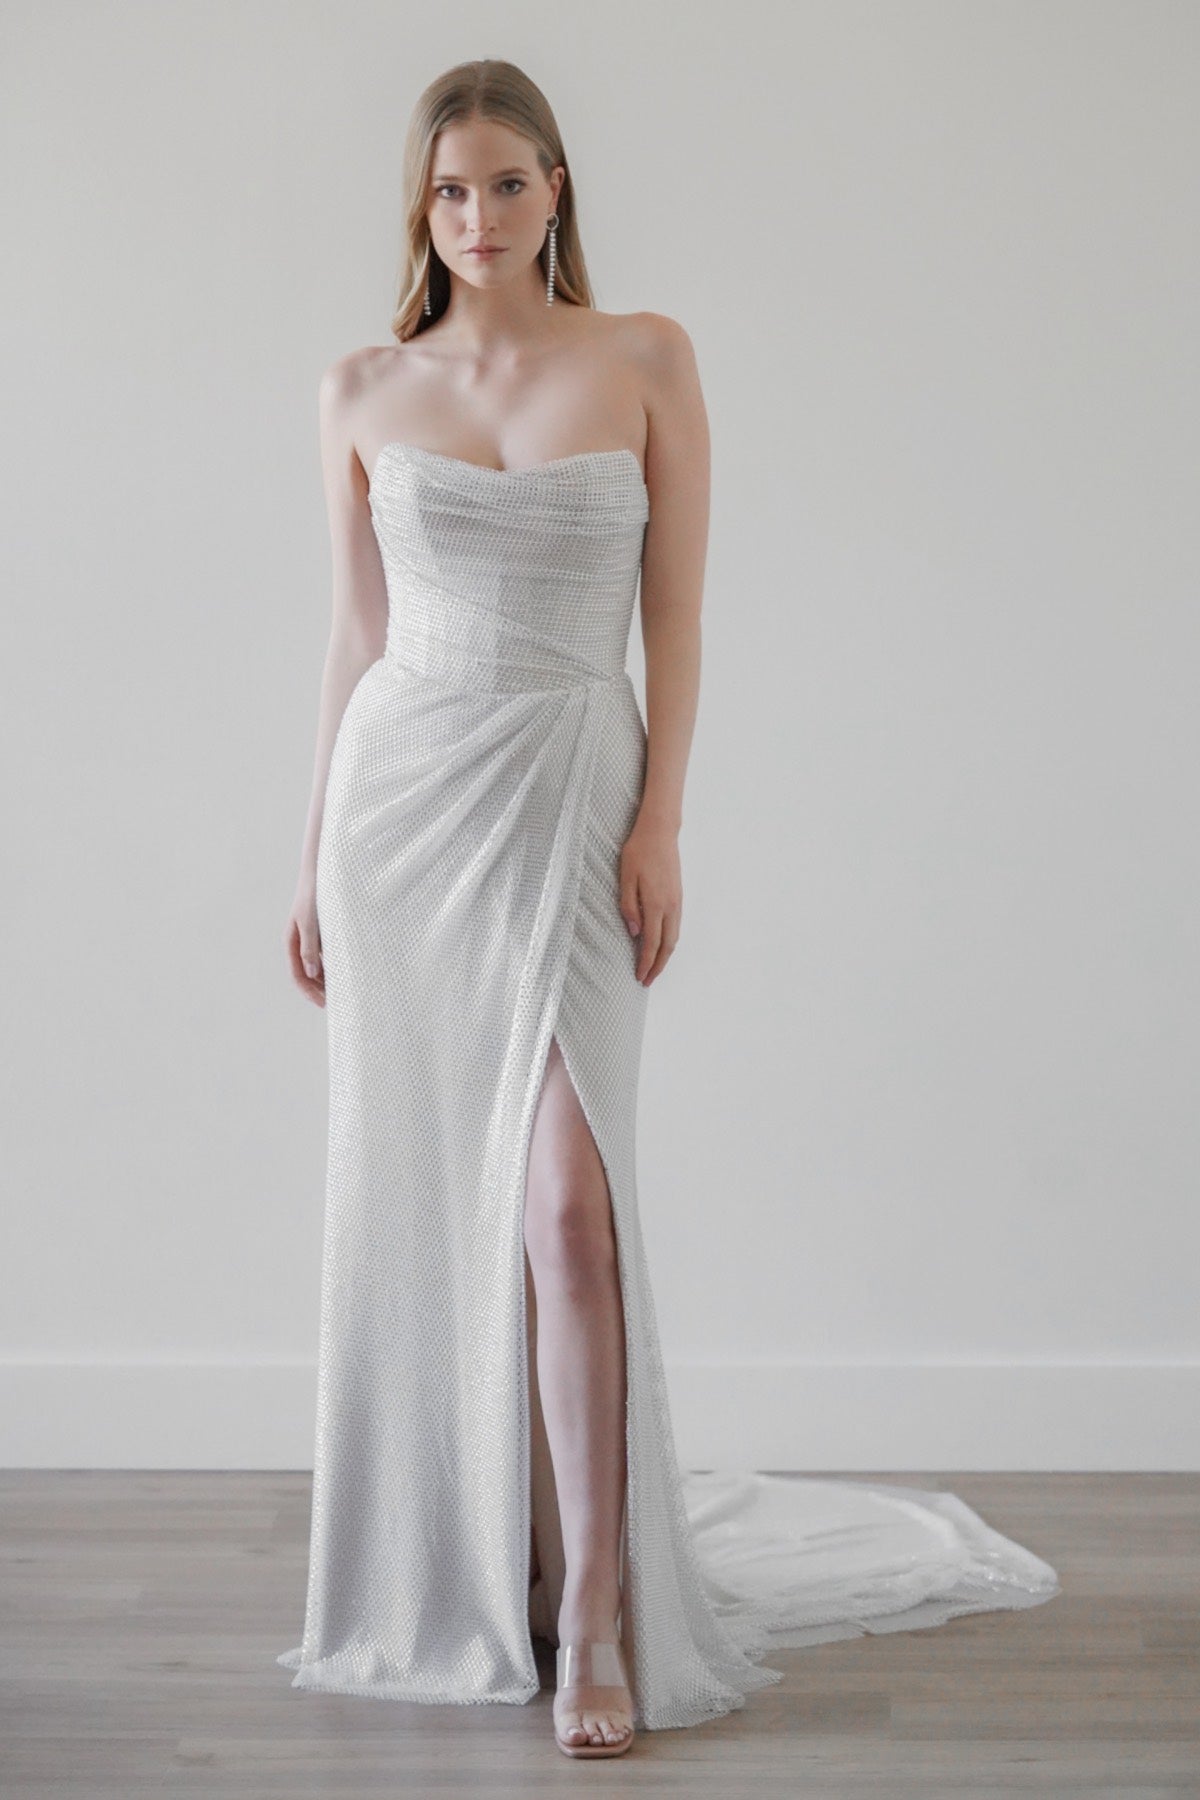 Sparkly Sheath Gown With Slit by Watters Designs - Image 1